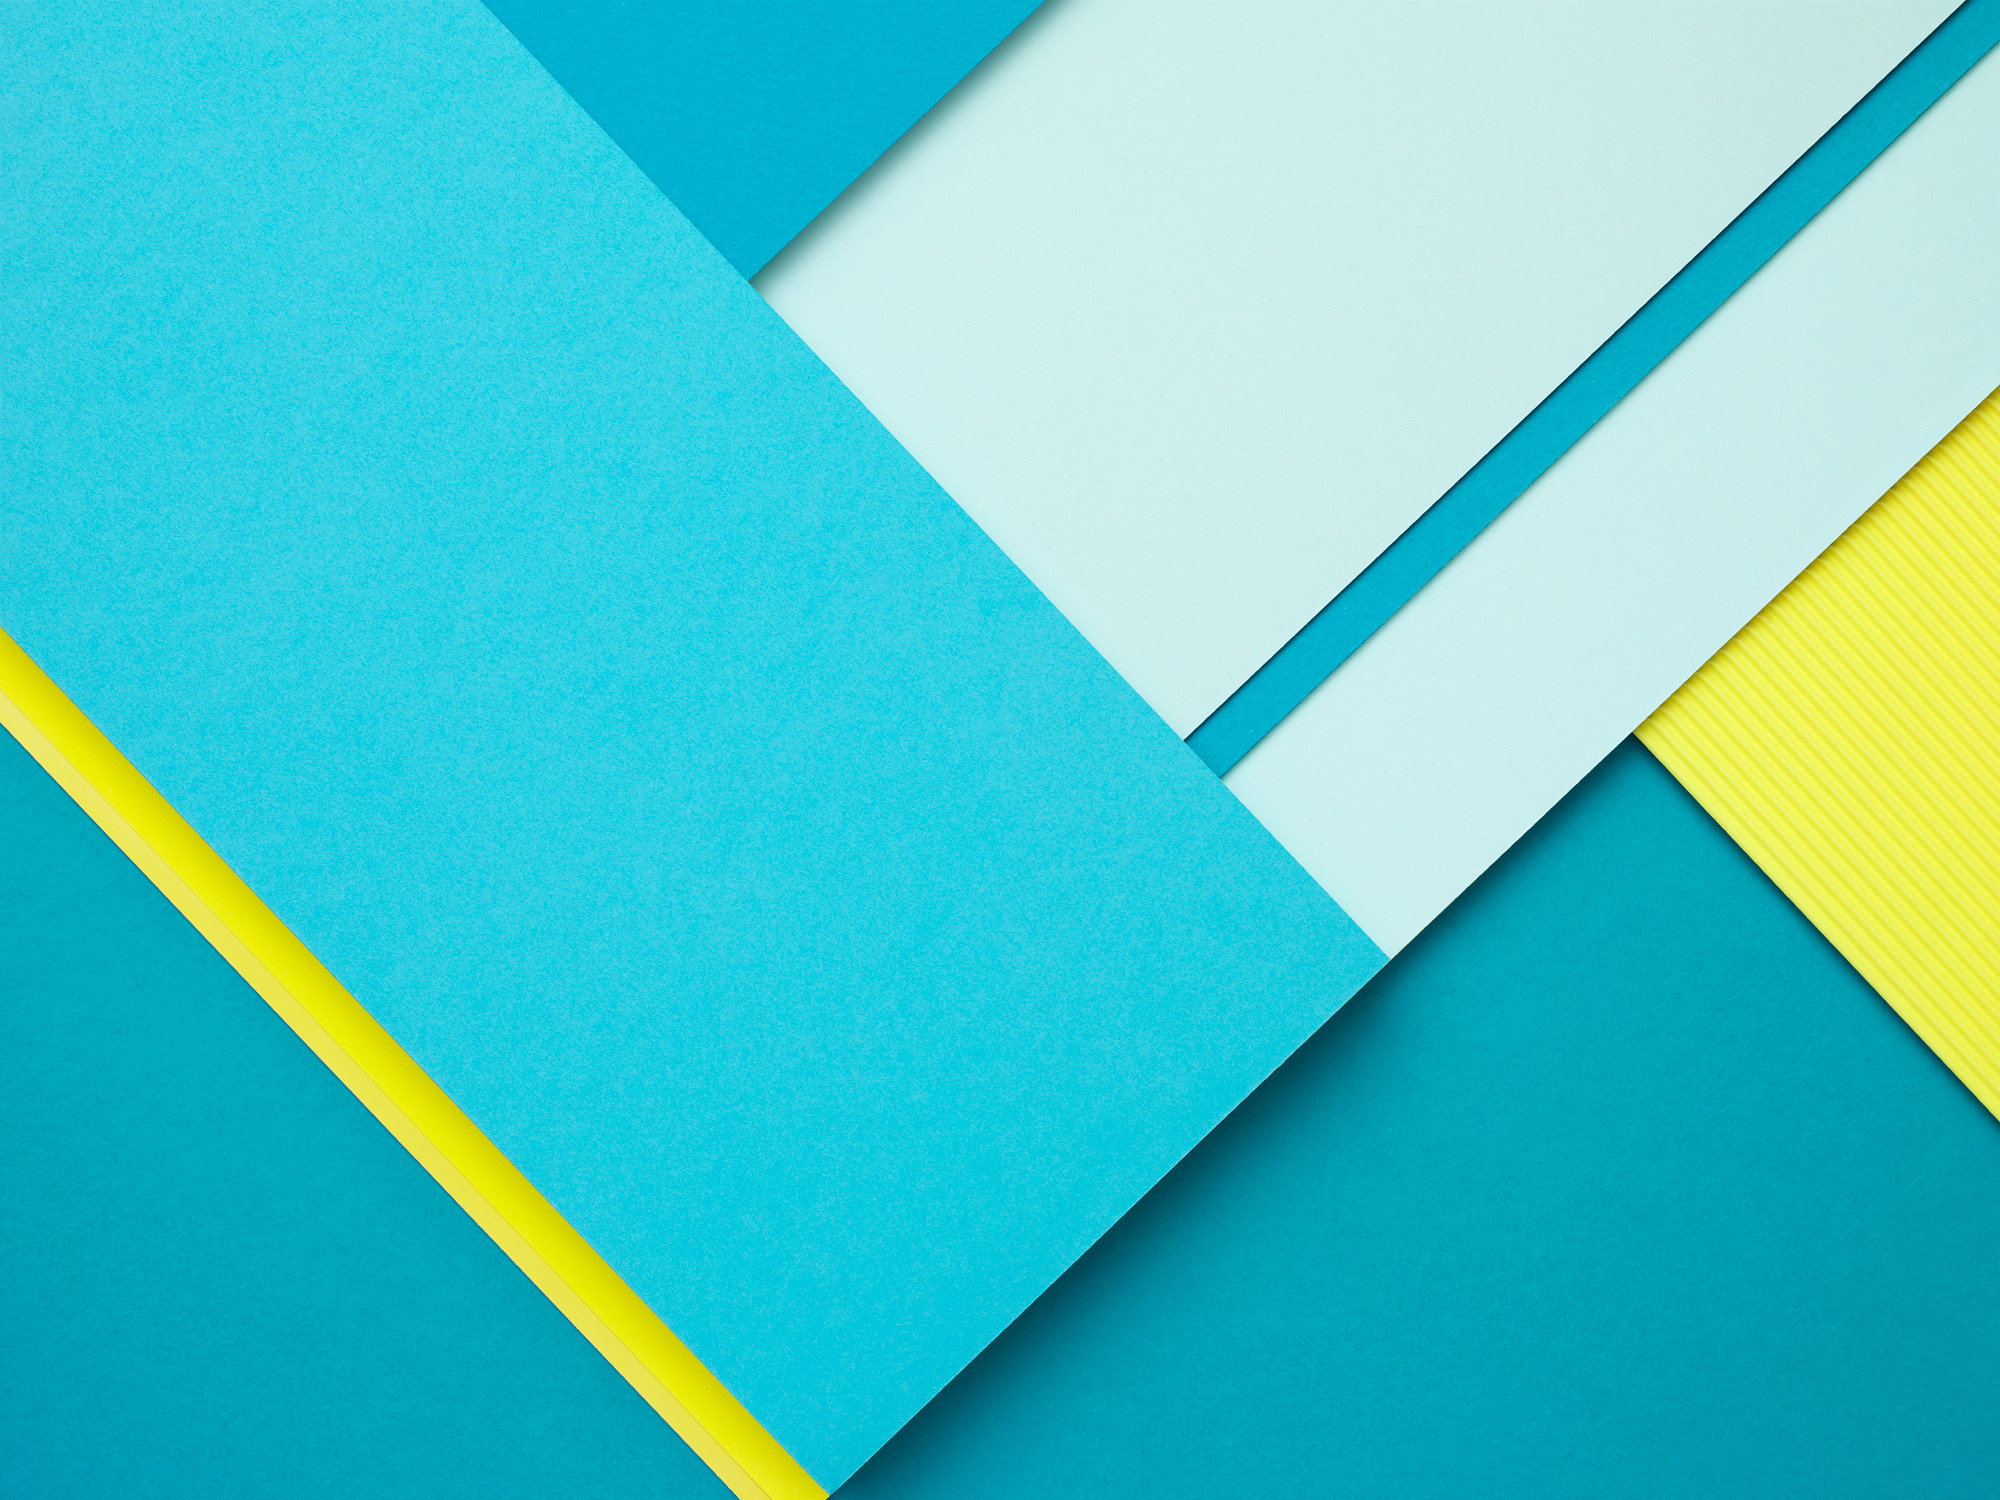 Collection of Material Design Wallpapers   IntraPixel